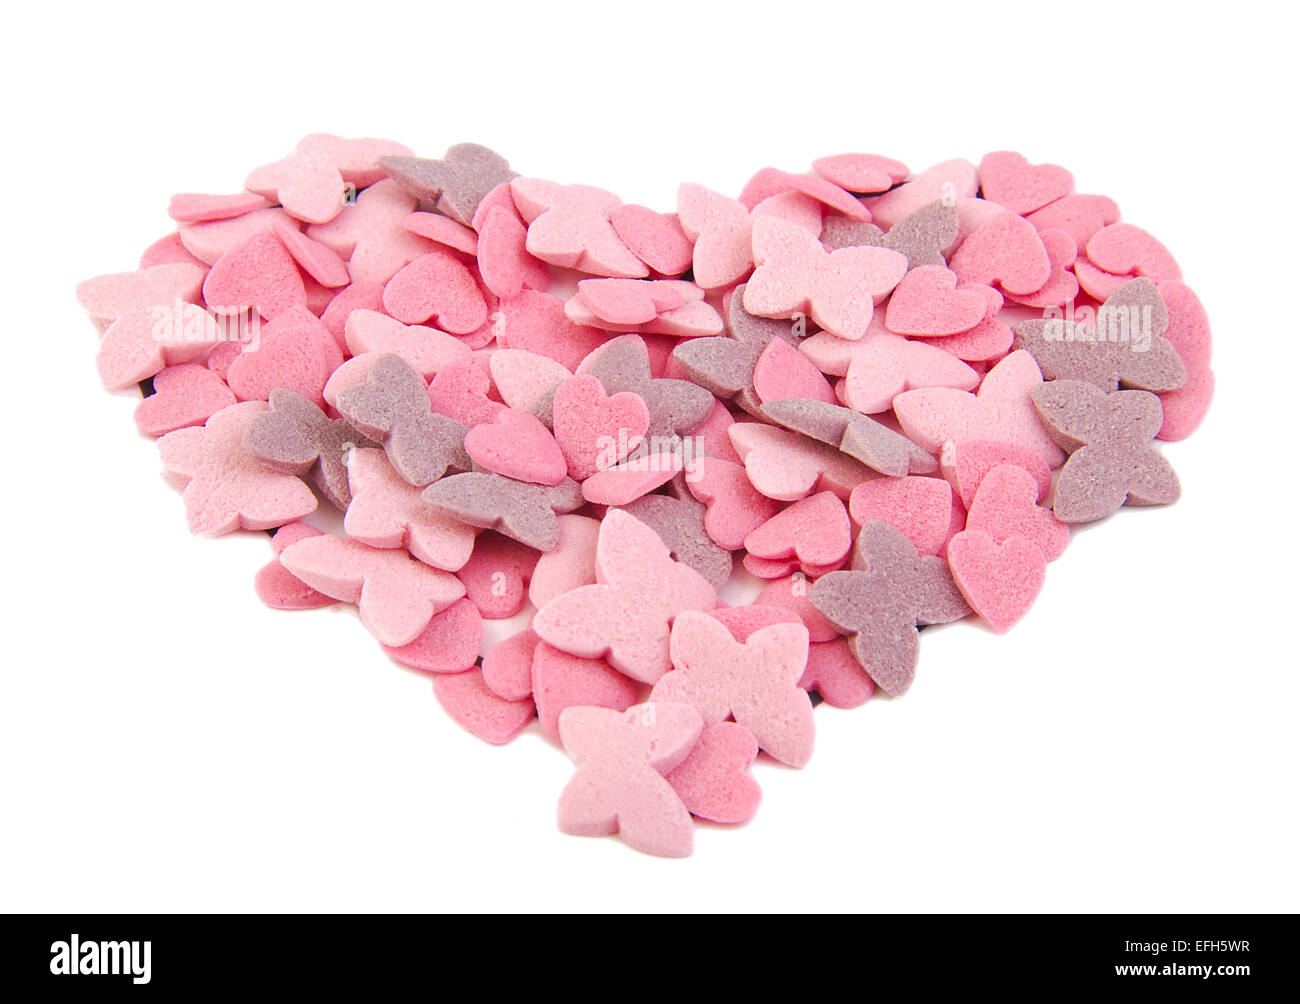 Love heart shape formed with sugar items isolated on white background. Love concept. Valentine's Day concept Stock Photo